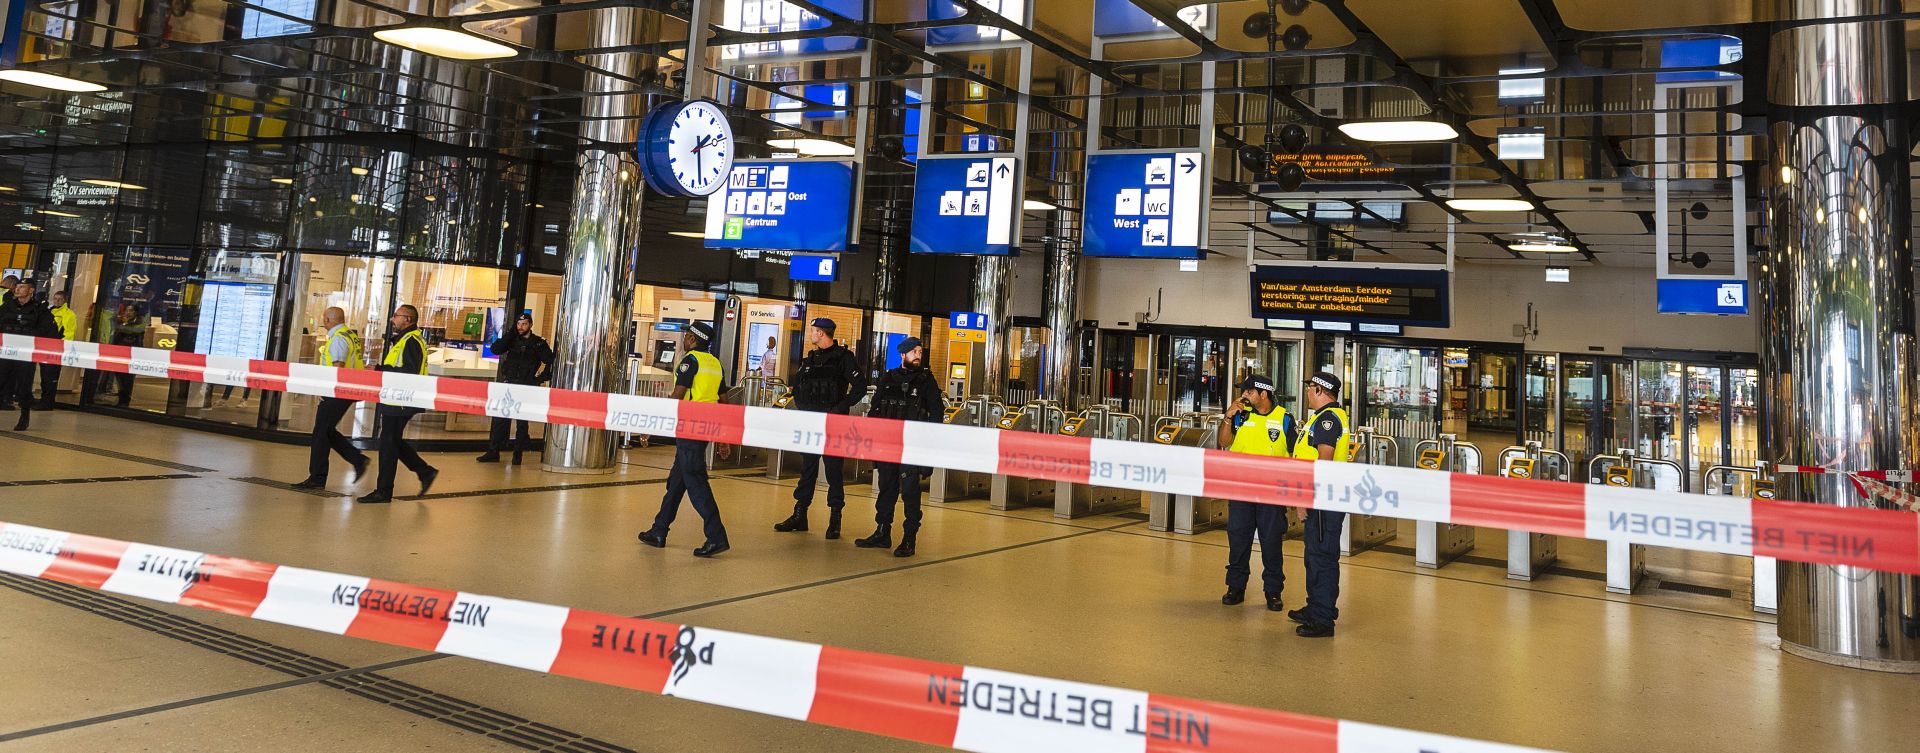 THE NETHERLANDS-AMSTERDAM-STABBING INCIDENT (180831) -- AMSTERDAM, Aug. 31, 2018 (Xinhua) -- Police officers work at Amsterdam's Central Station, the Netherlands, on Aug. 31, 2018. Two people were injured in a stabbing incident at Amsterdam's Central Station on Friday, according to Dutch television NOS. (Xinhua/Evert Elzinga) (jmmn) Evert Elzinga  Photo: XINHUA/PIXSELL